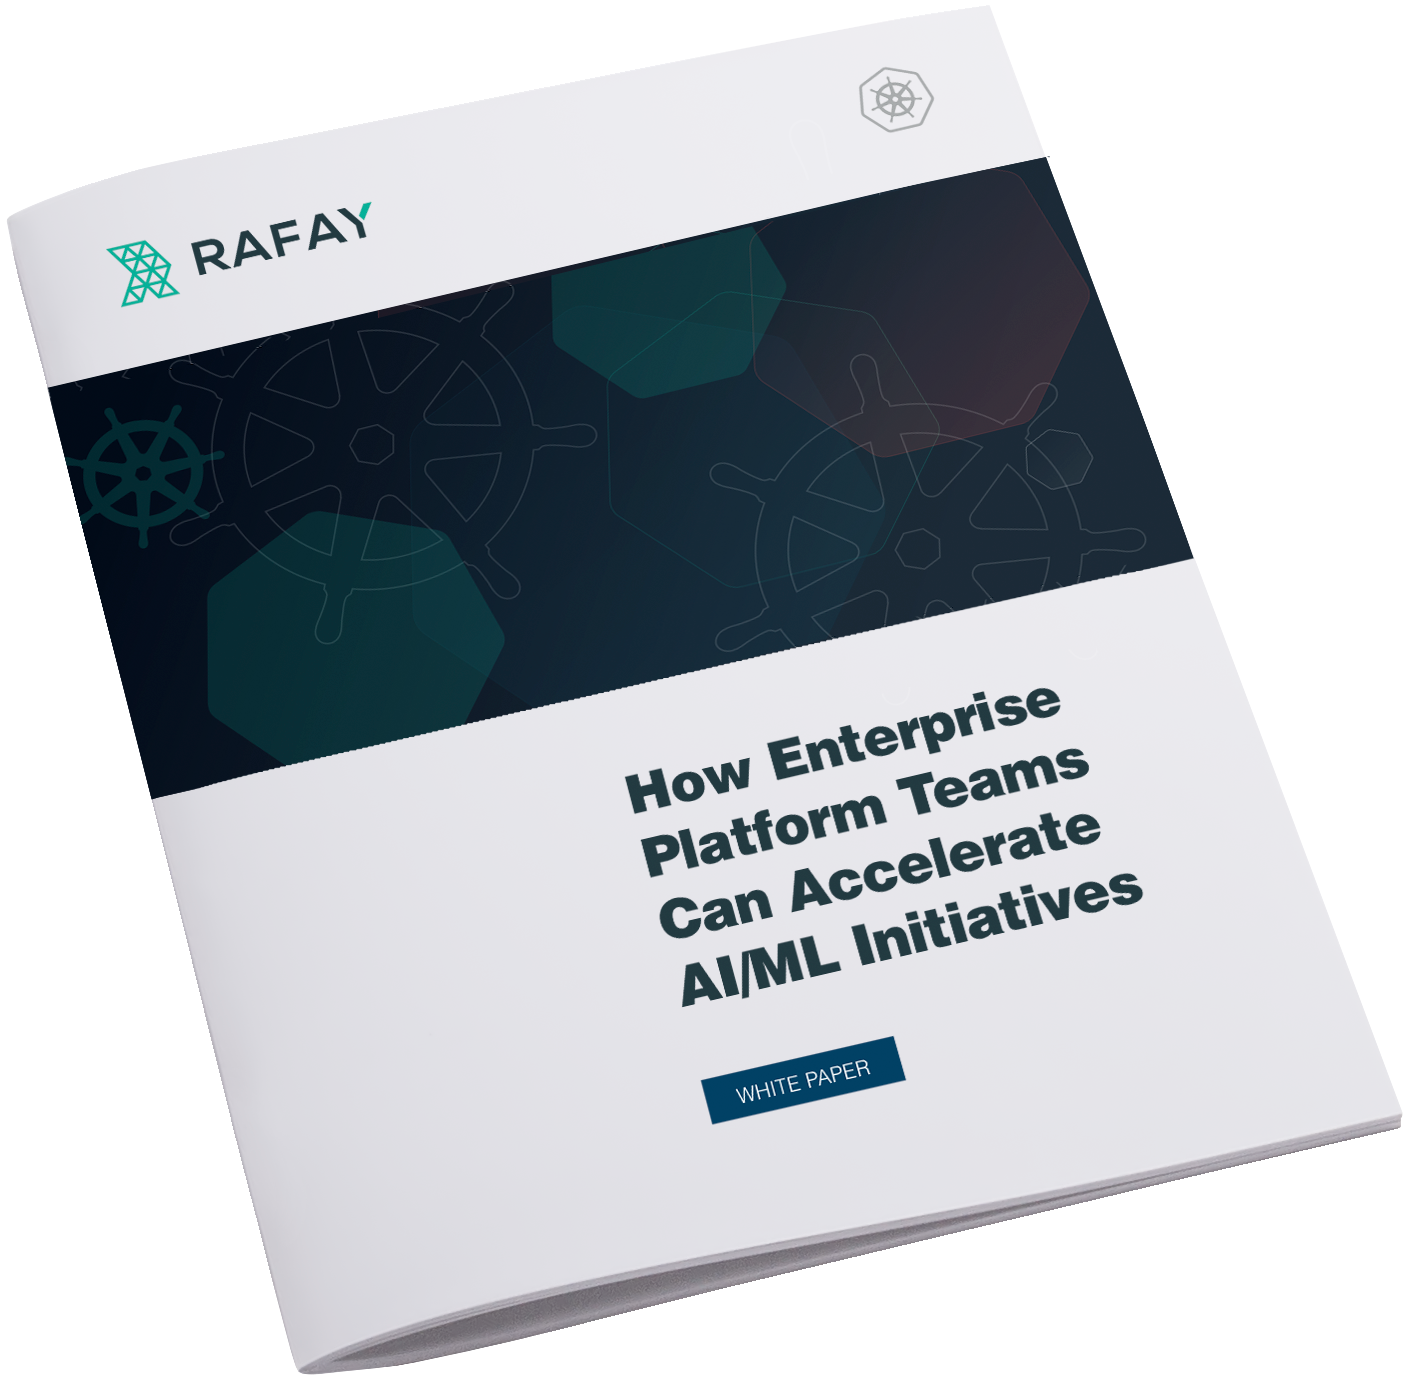 image for How Enterprise Platform Teams Can Accelerate AI/ML Initiatives